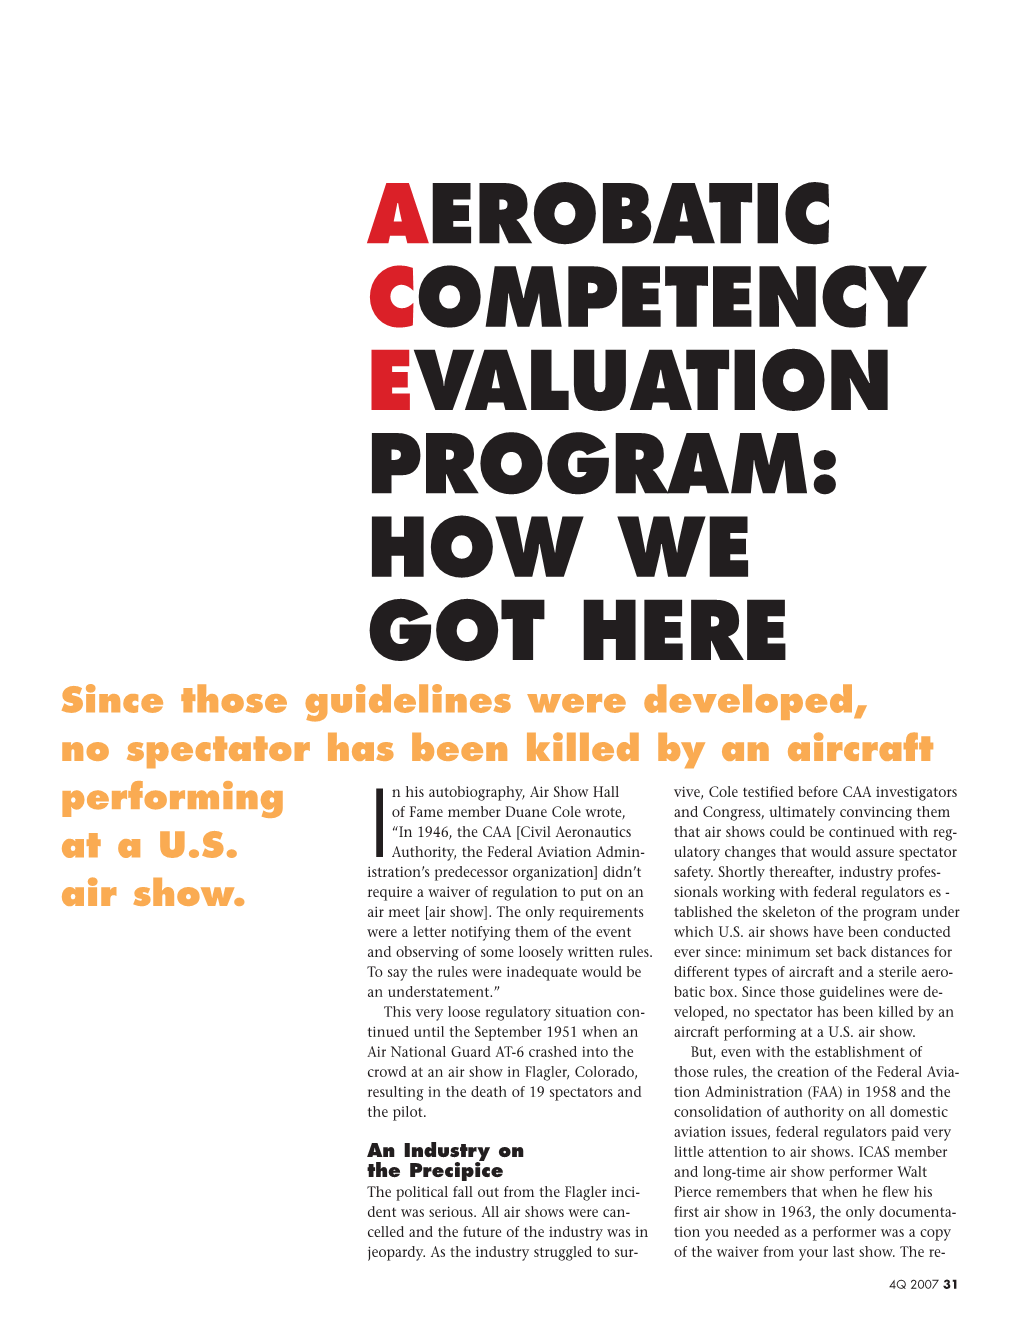 AEROBATIC COMPETENCY EVALUATION PROGRAM: HOW WE GOT HERE Since Those Guidelines Were Developed, No Spectator Has Been Killed by an Aircraft